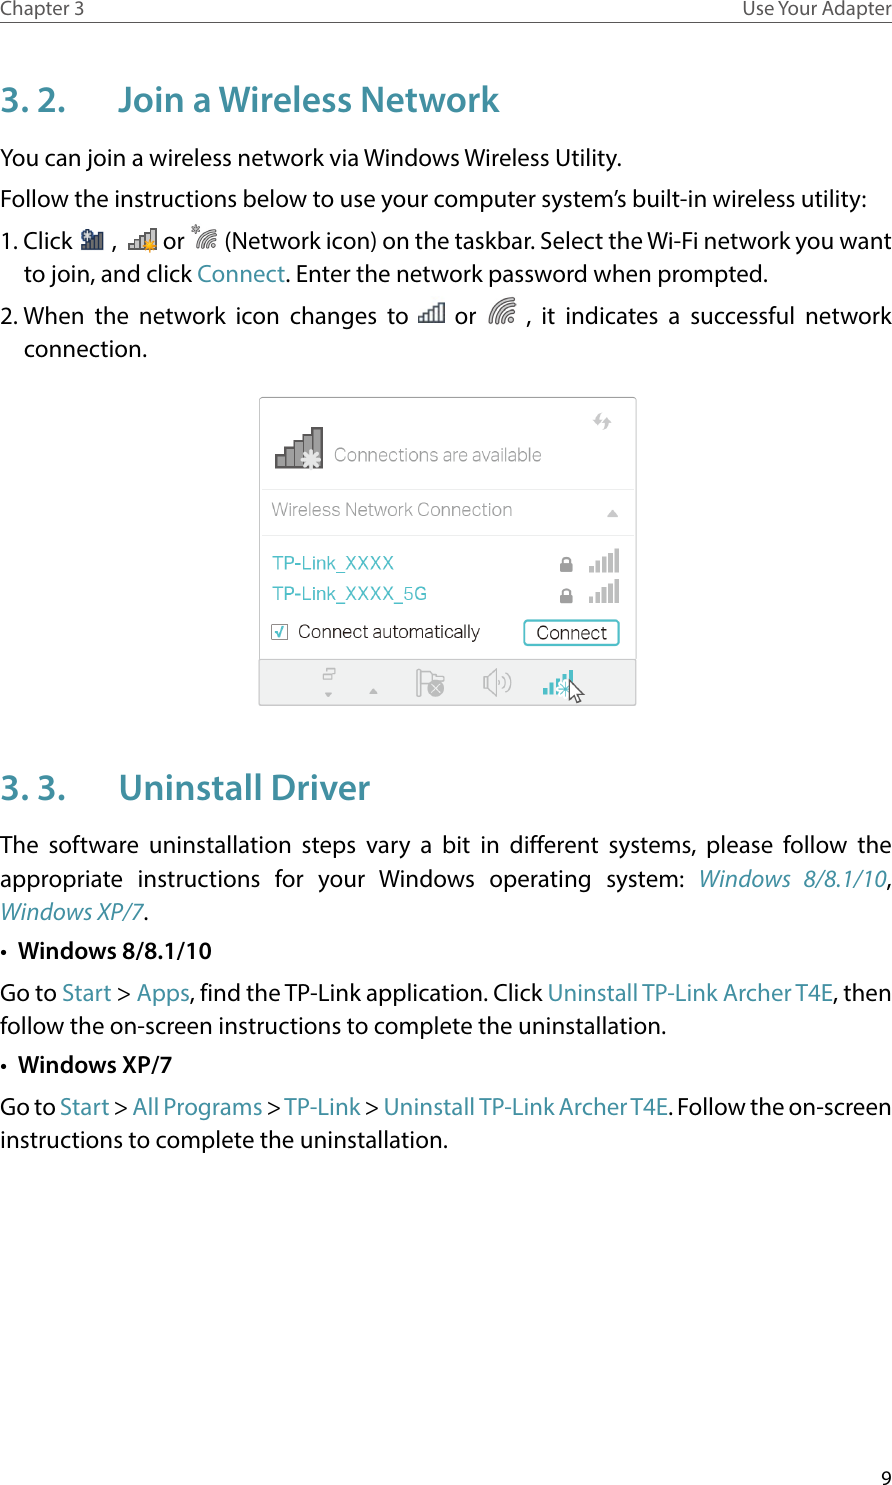 9Chapter 3 Use Your Adapter3. 2.  Join a Wireless NetworkYou can join a wireless network via Windows Wireless Utility. Follow the instructions below to use your computer system’s built-in wireless utility: 1. Click   ,    or   (Network icon) on the taskbar. Select the Wi-Fi network you want to join, and click Connect. Enter the network password when prompted.2. When the network icon changes to   or   , it indicates a successful network connection.  3. 3.  Uninstall DriverThe software uninstallation steps vary a bit in different systems, please follow the appropriate instructions for your Windows operating system: Windows 8/8.1/10, Windows XP/7.•  Windows 8/8.1/10Go to Start &gt; Apps, find the TP-Link application. Click Uninstall TP-Link Archer T4E, then follow the on-screen instructions to complete the uninstallation.•  Windows XP/7Go to Start &gt; All Programs &gt; TP-Link &gt; Uninstall TP-Link Archer T4E. Follow the on-screen instructions to complete the uninstallation.